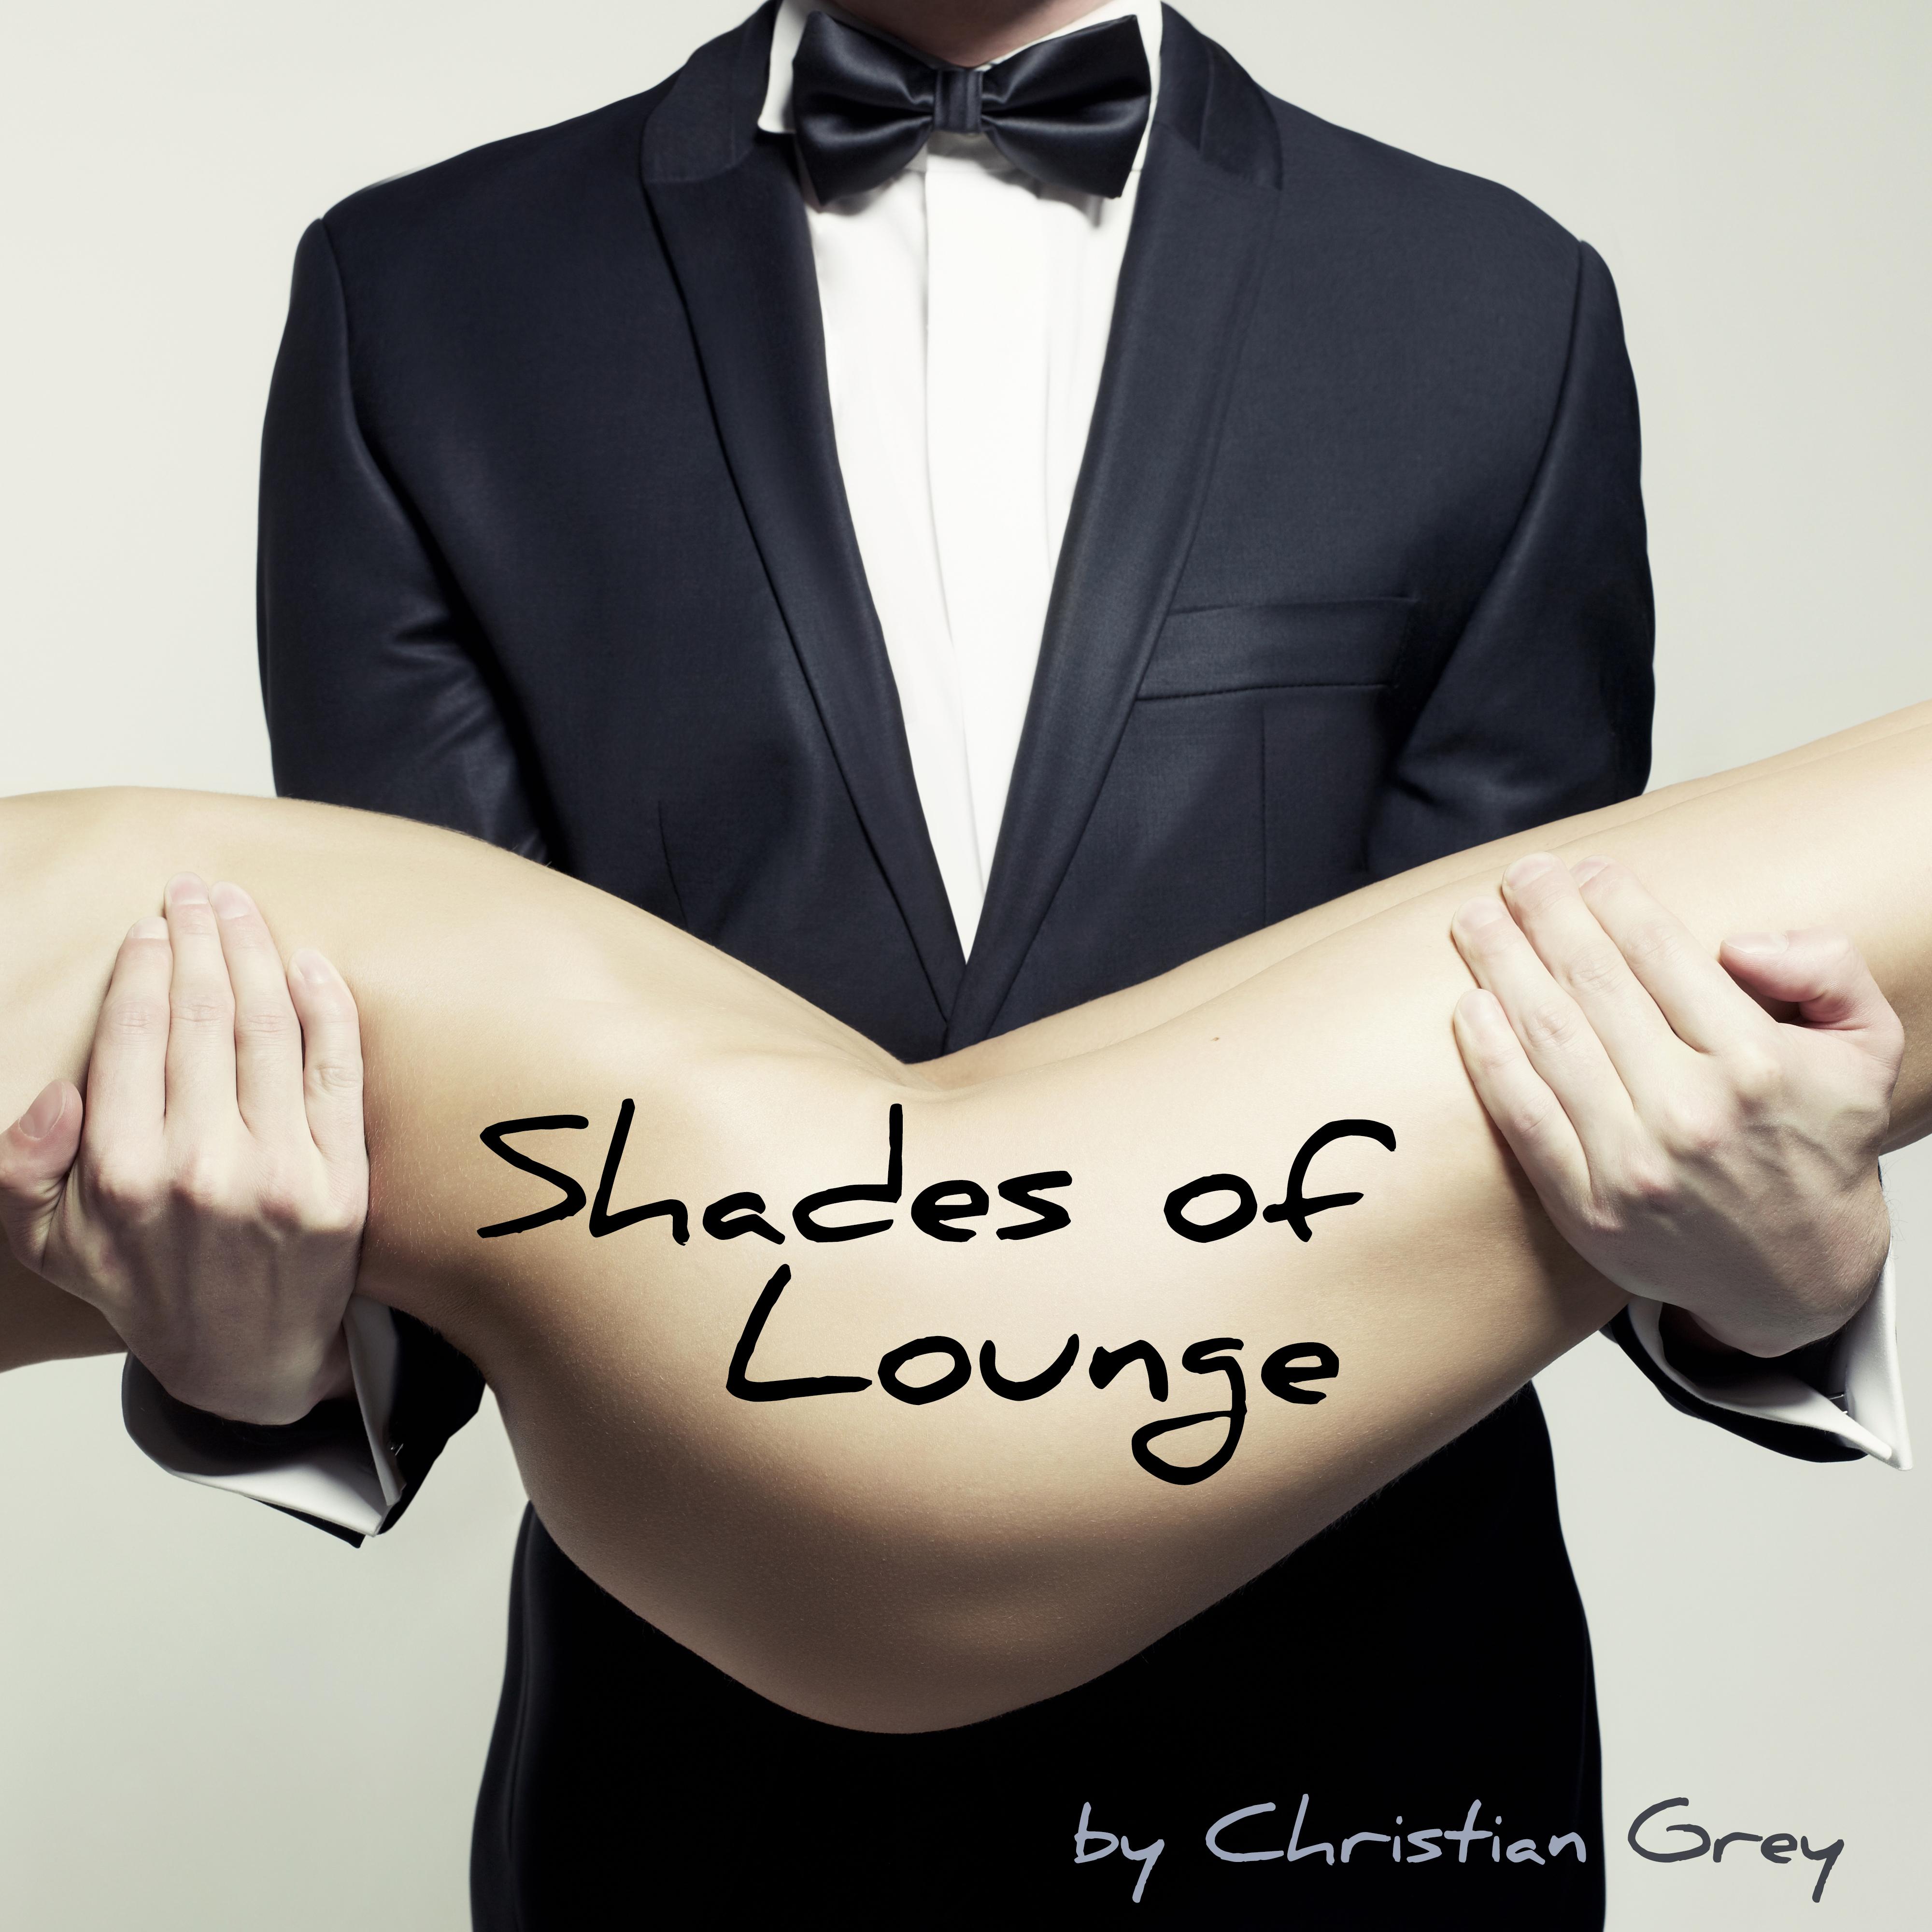 Shades of Lounge for Intimacy, Special *** & Bondage in Red Room (compiled by Christian Grey)